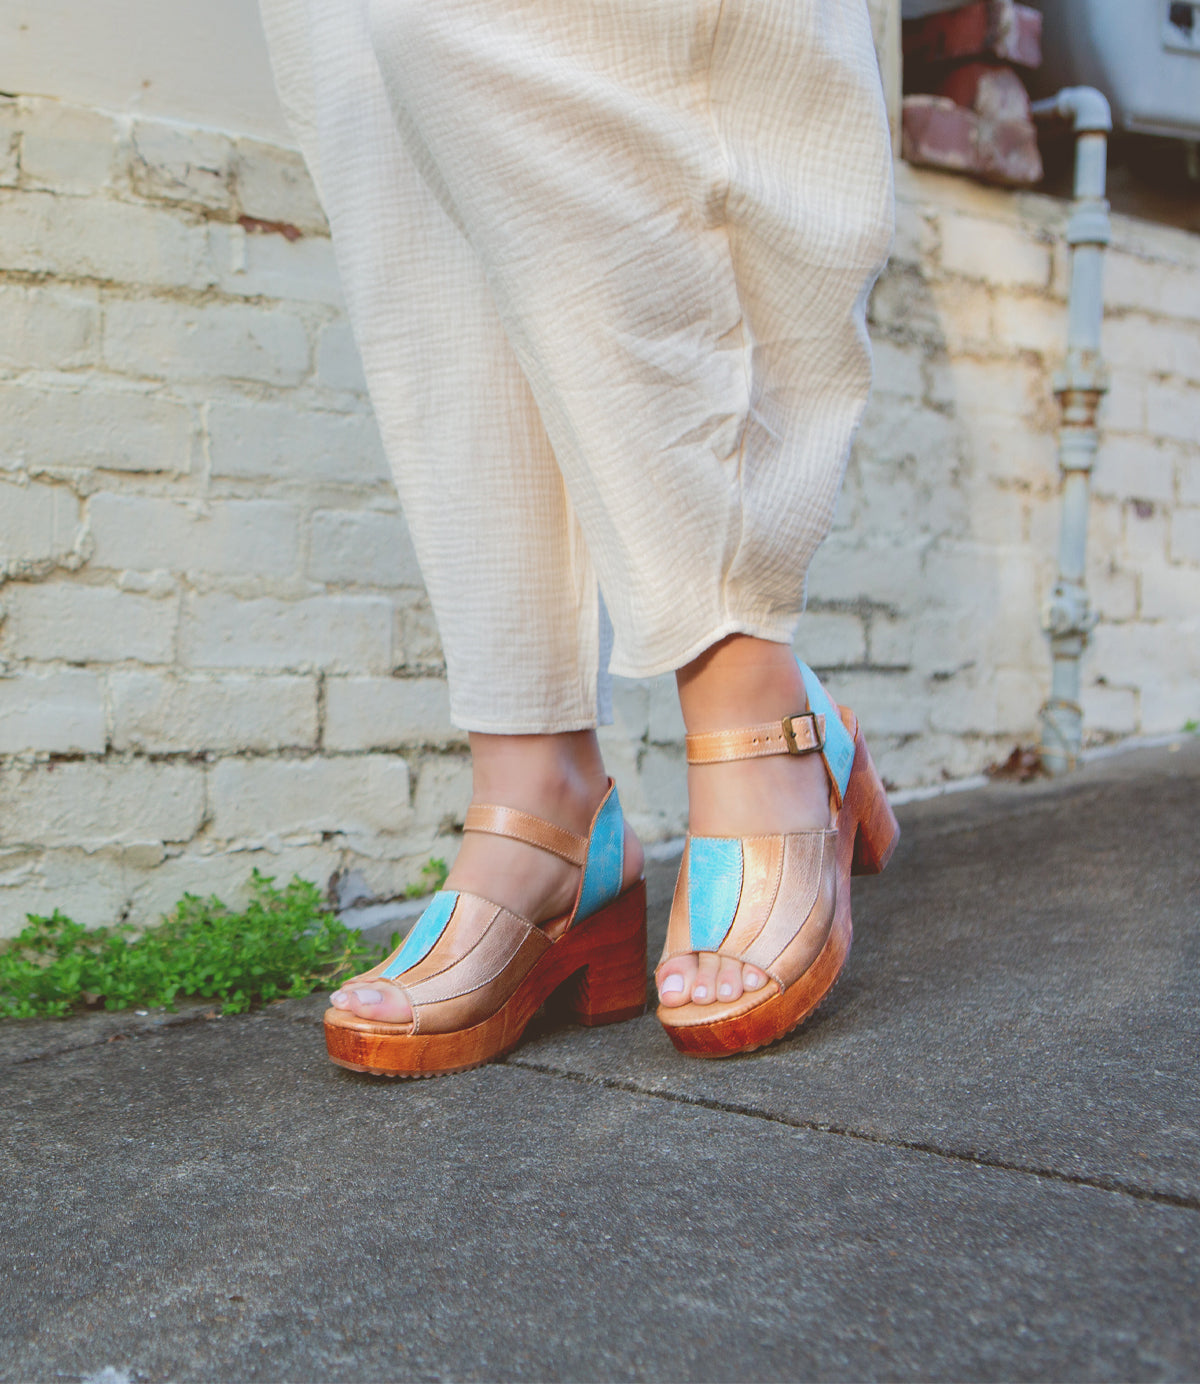 A person standing in Bed Stu's Jetsetter leather heels with patchwork finishes on a pavement next to a wall.